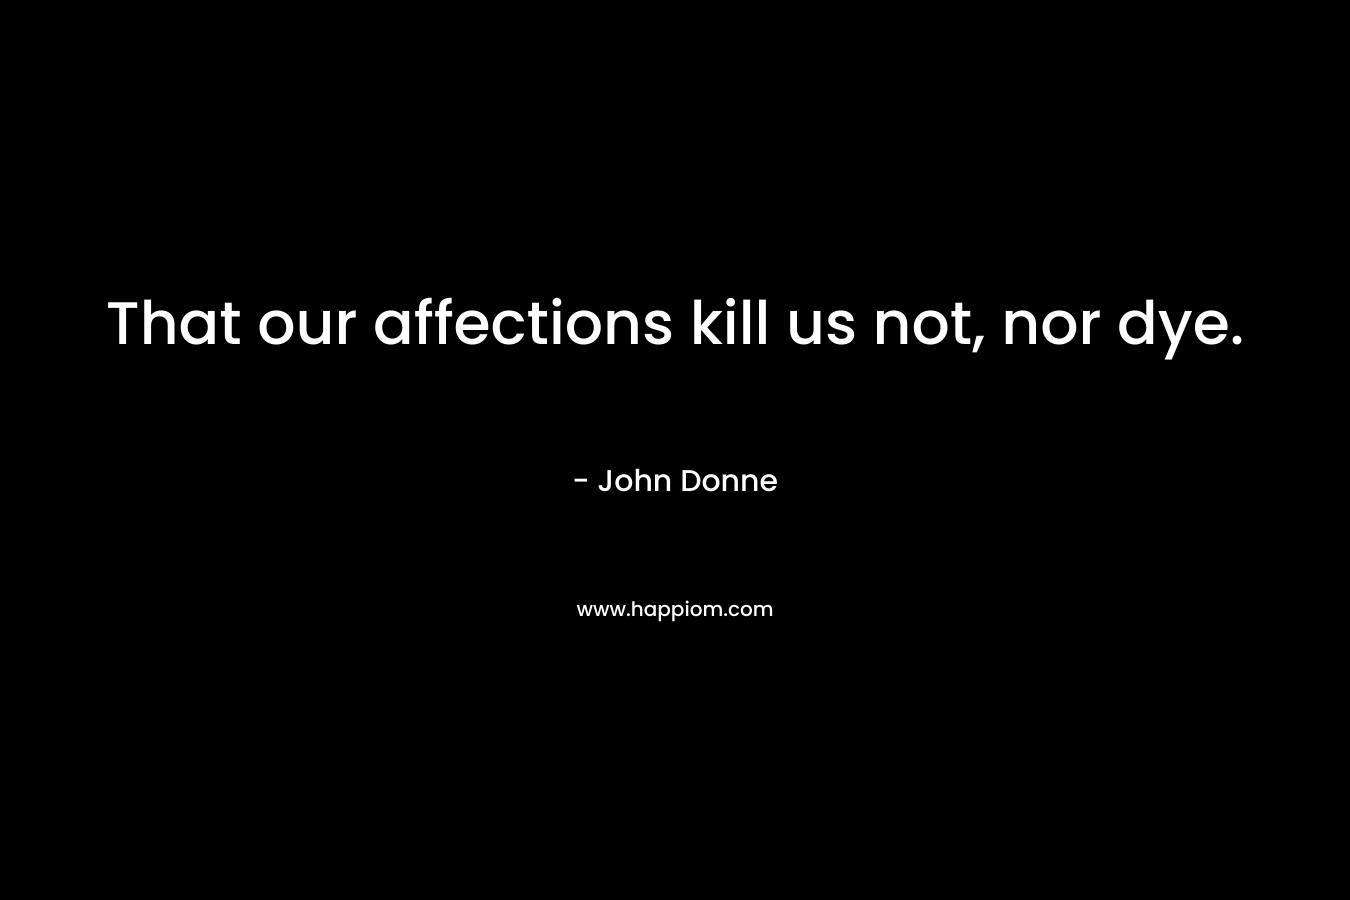 That our affections kill us not, nor dye. – John Donne